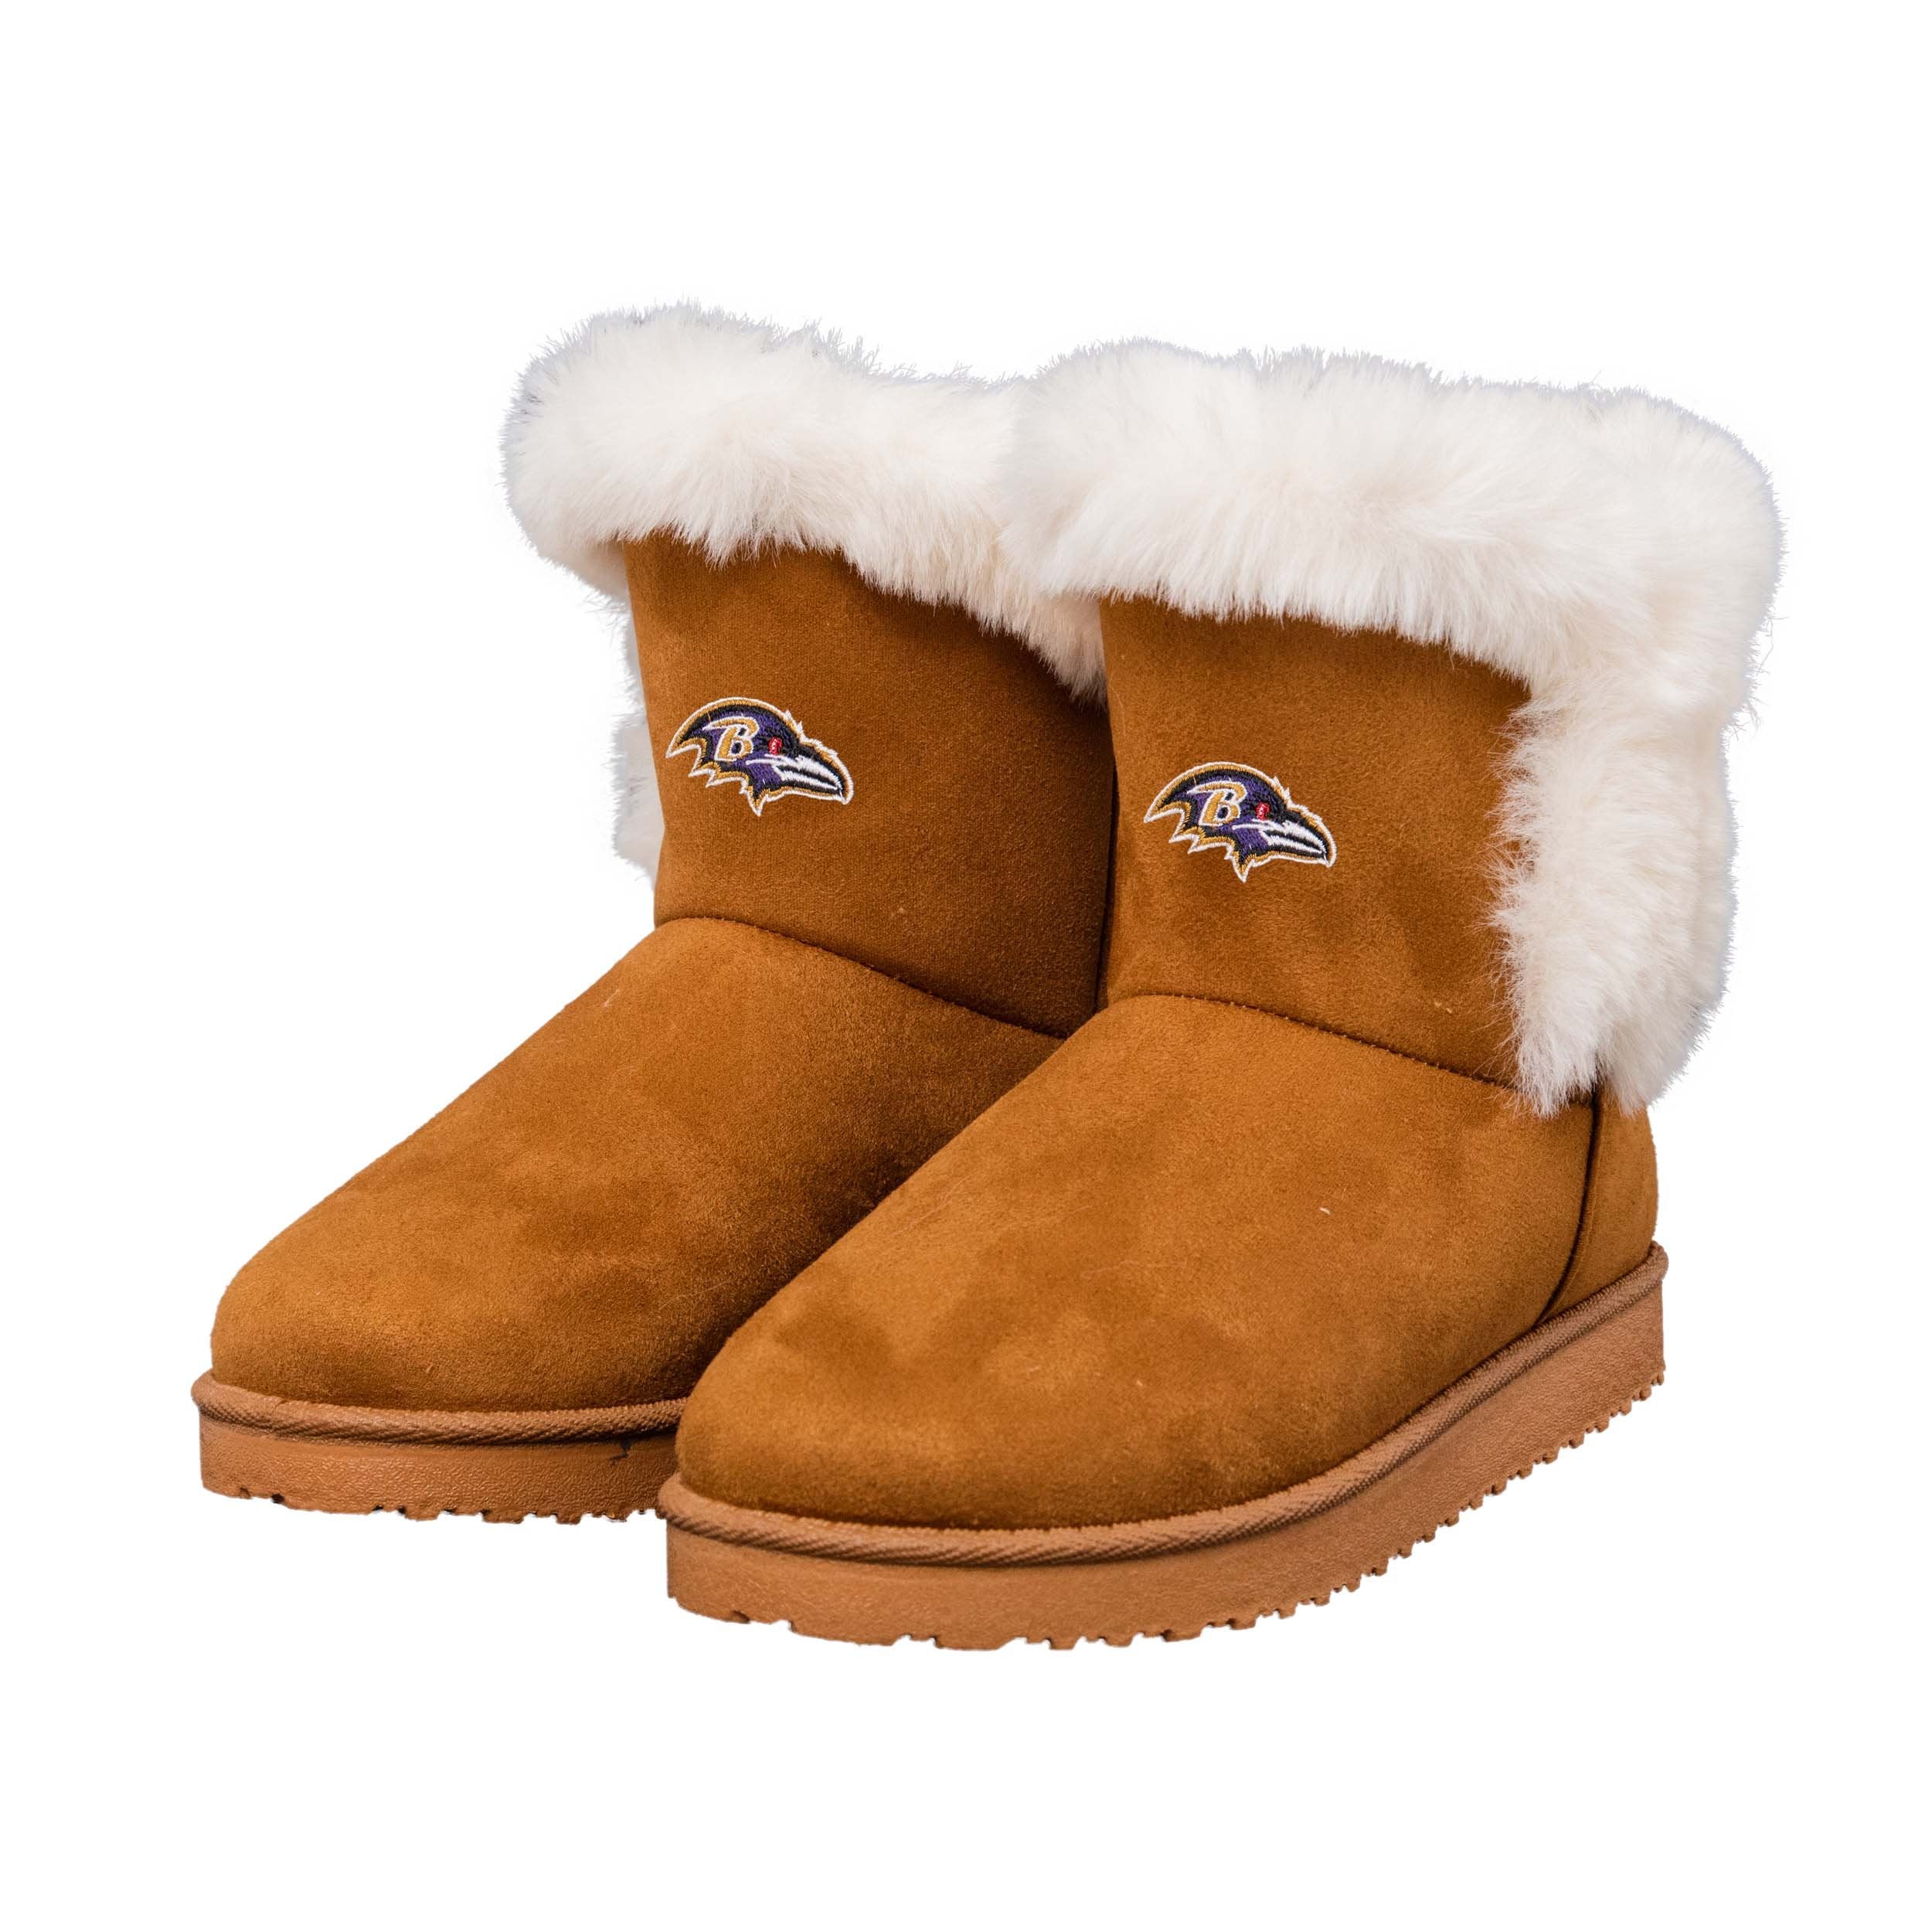 white fur boots womens